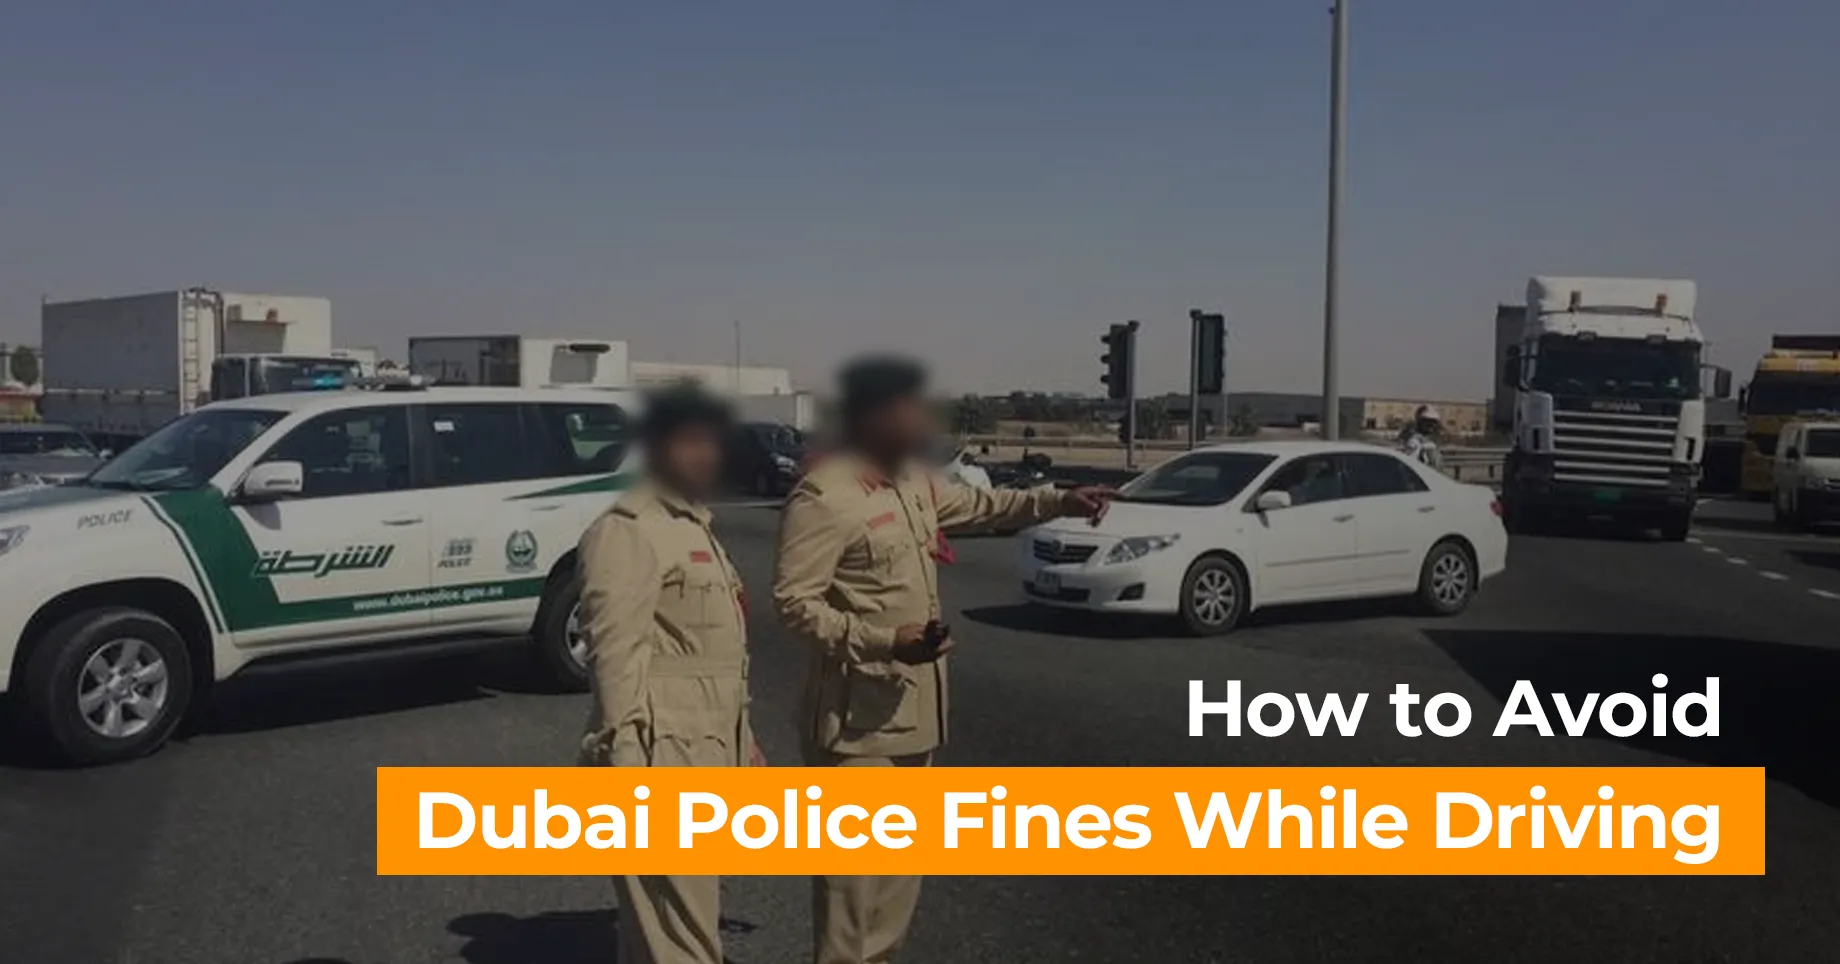 How to Avoid Dubai Police Fines While Driving